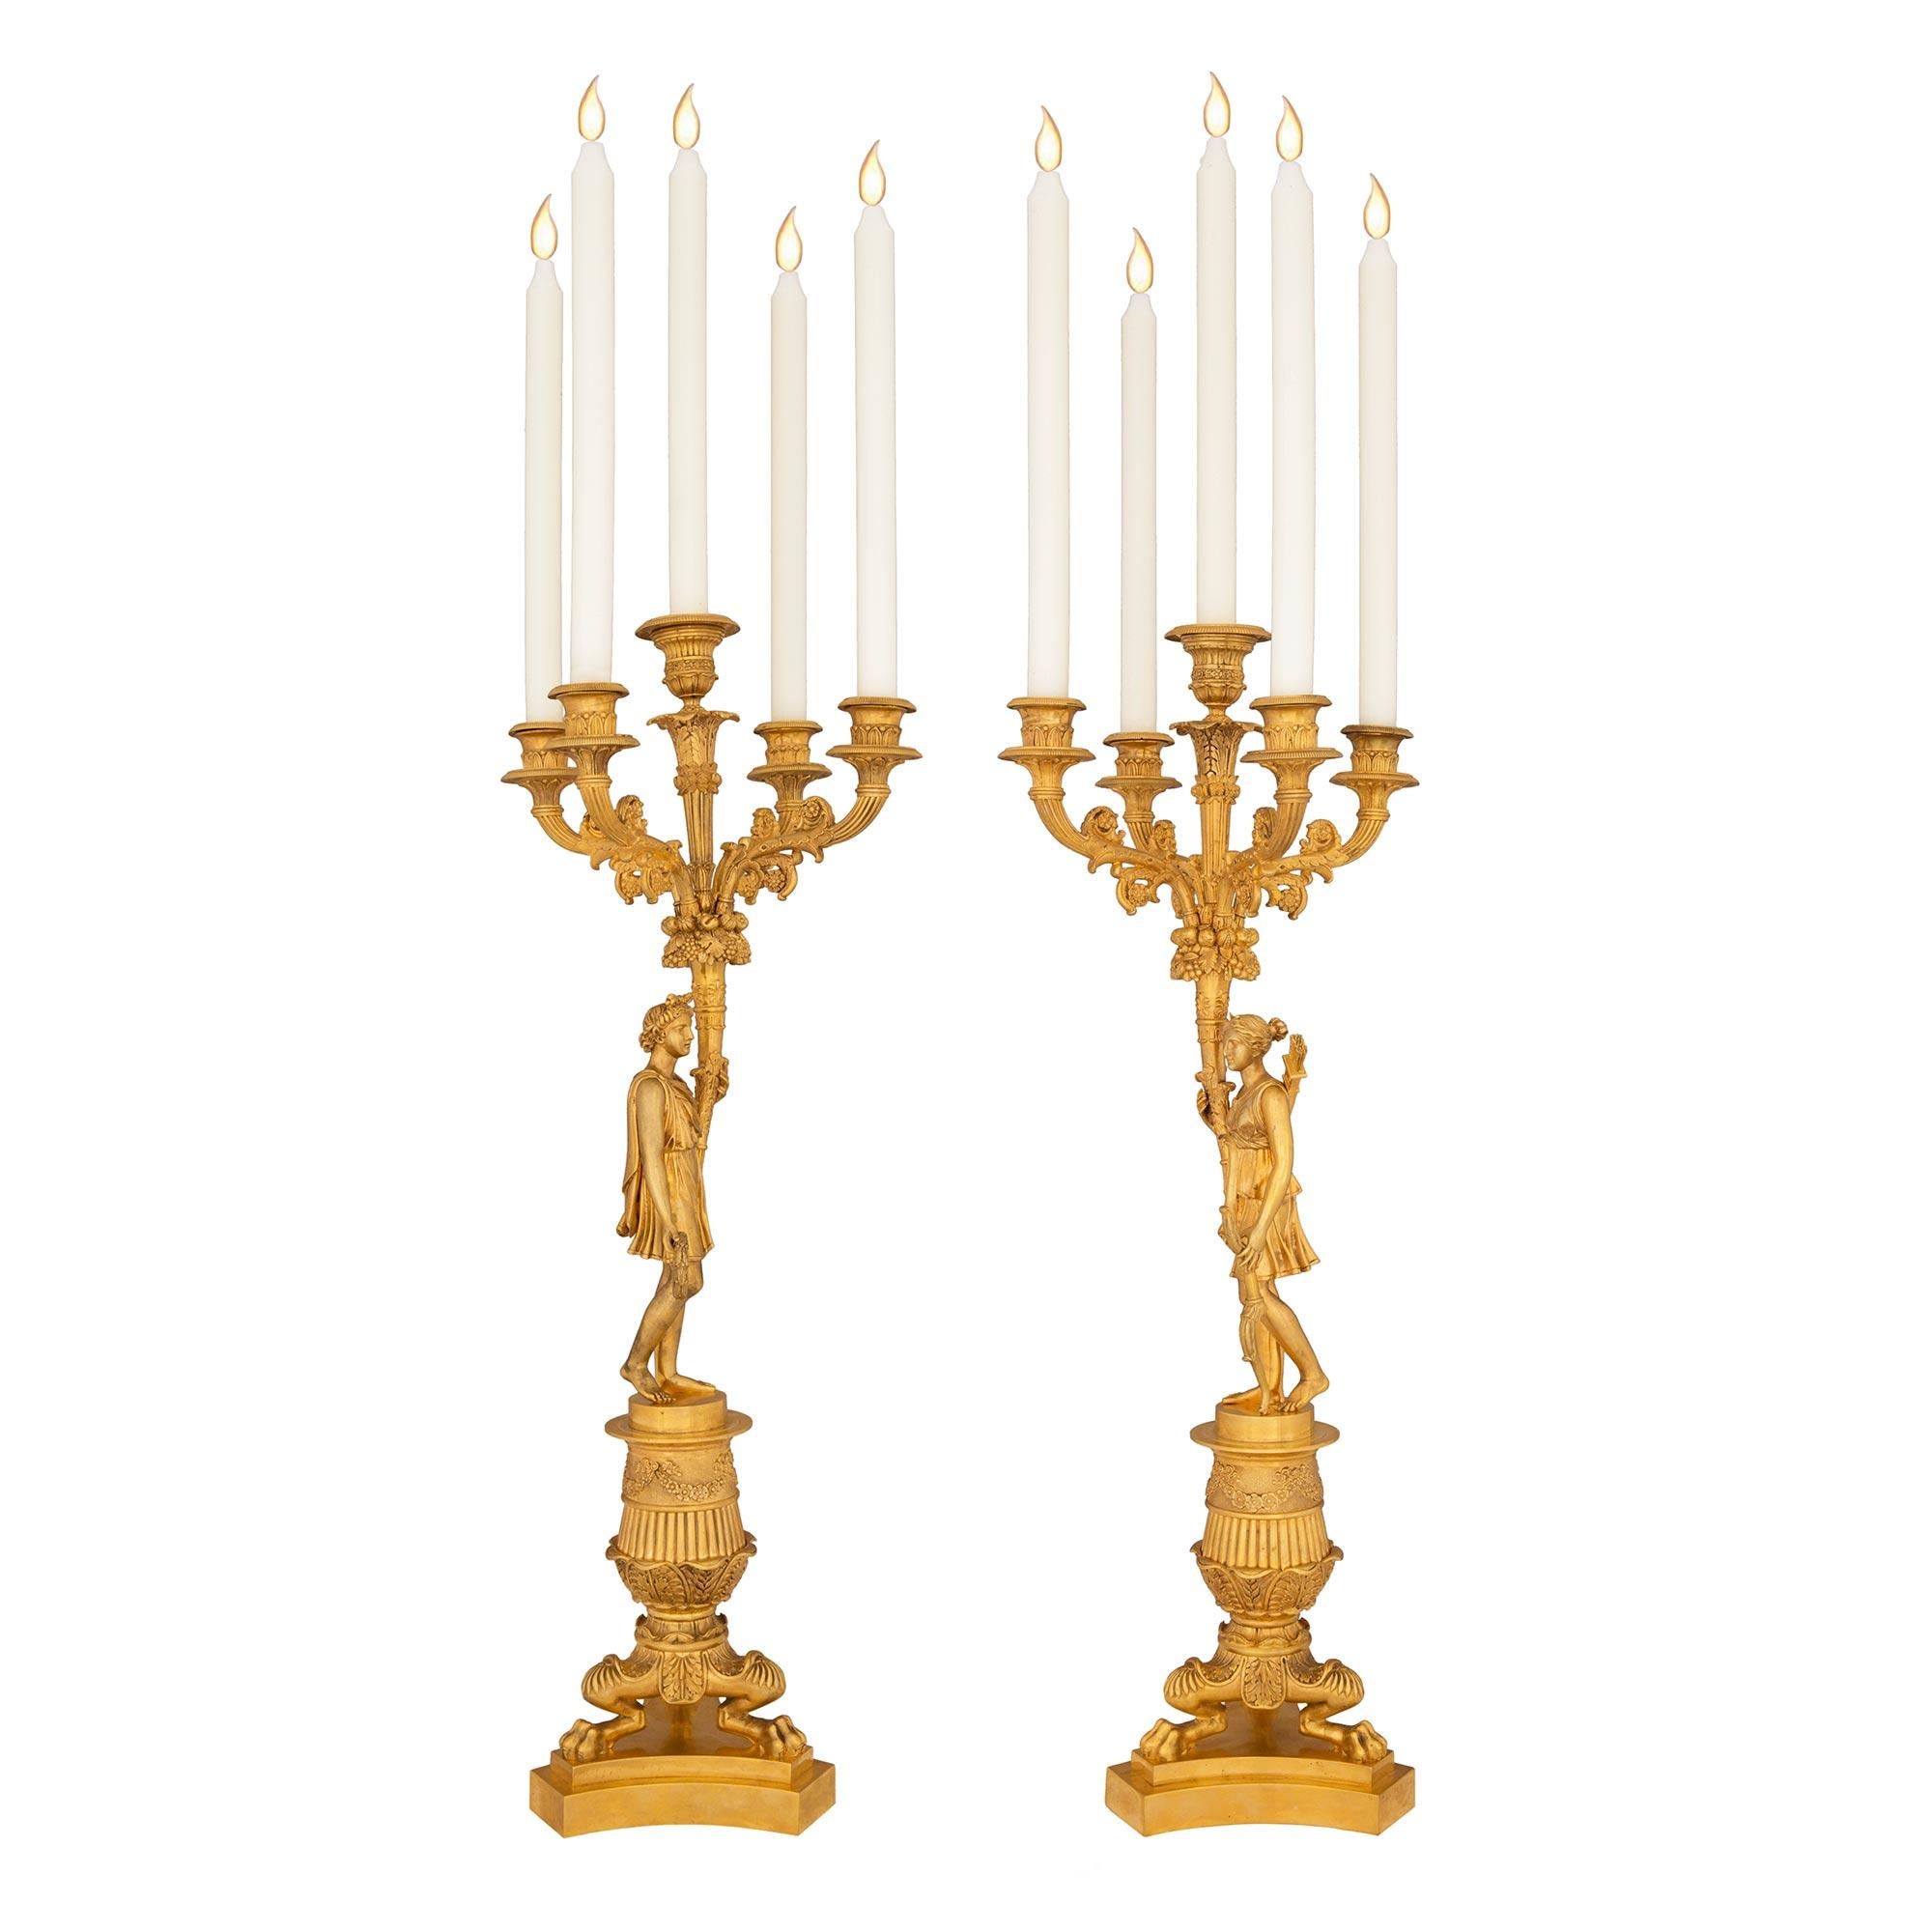 Pair of French Mid 19th Century Charles X Period Ormolu Candelabras For Sale 1